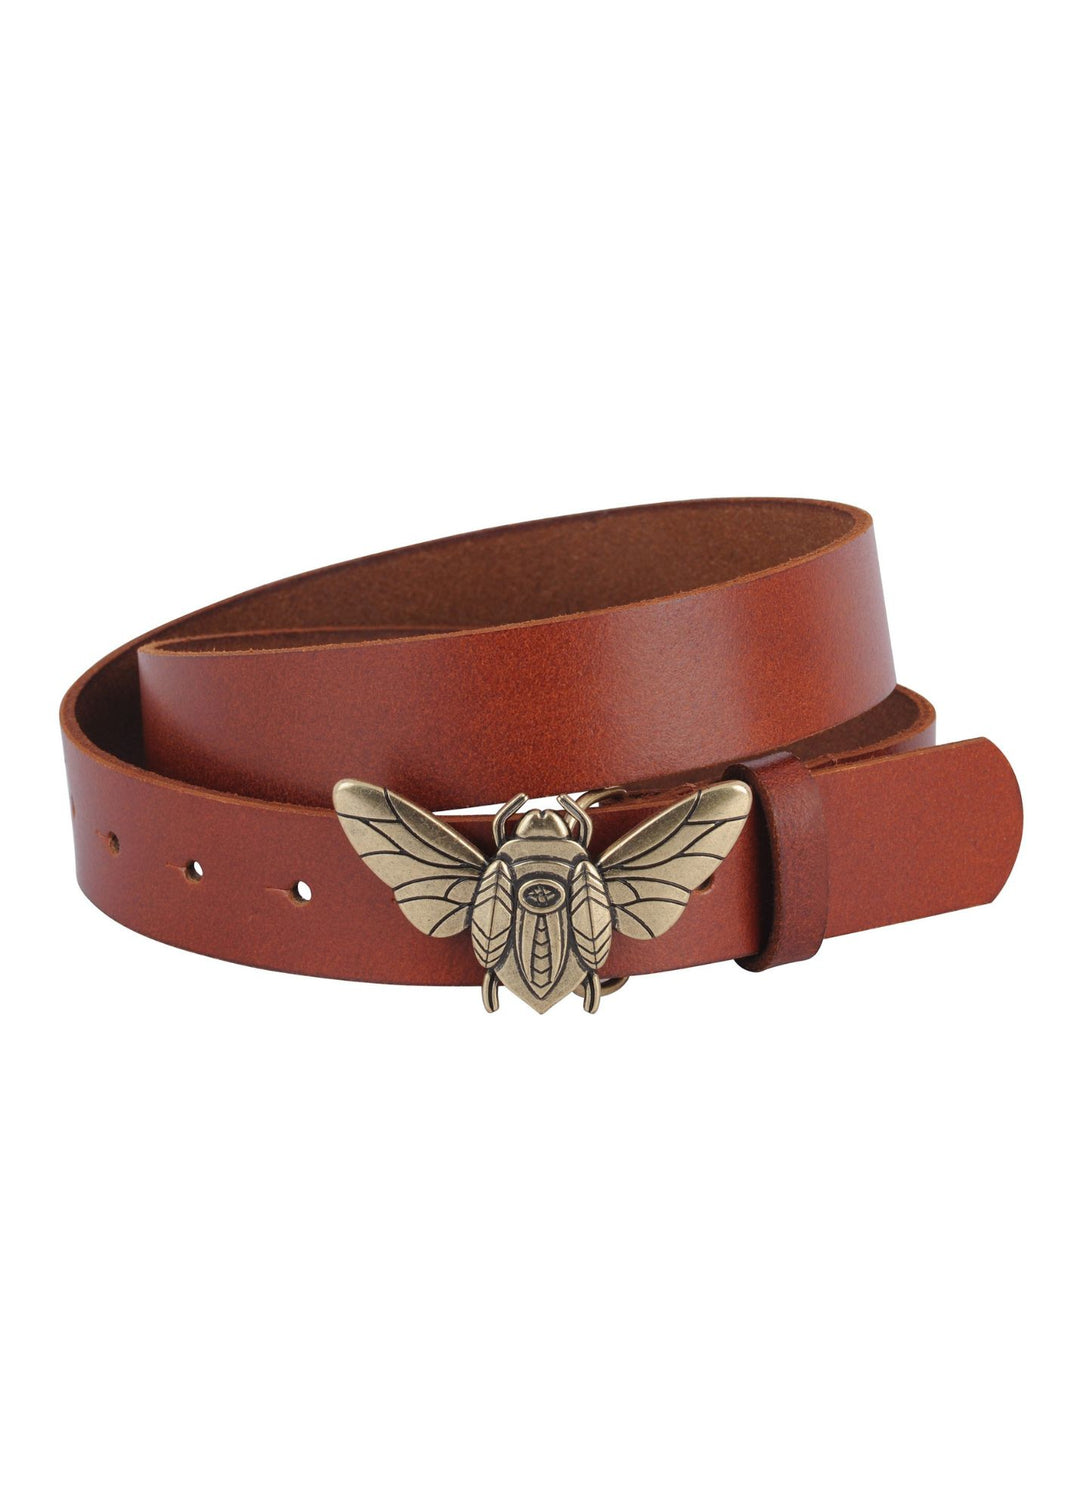 Most Wanted Bee Buckle Leather Belt (Tan)